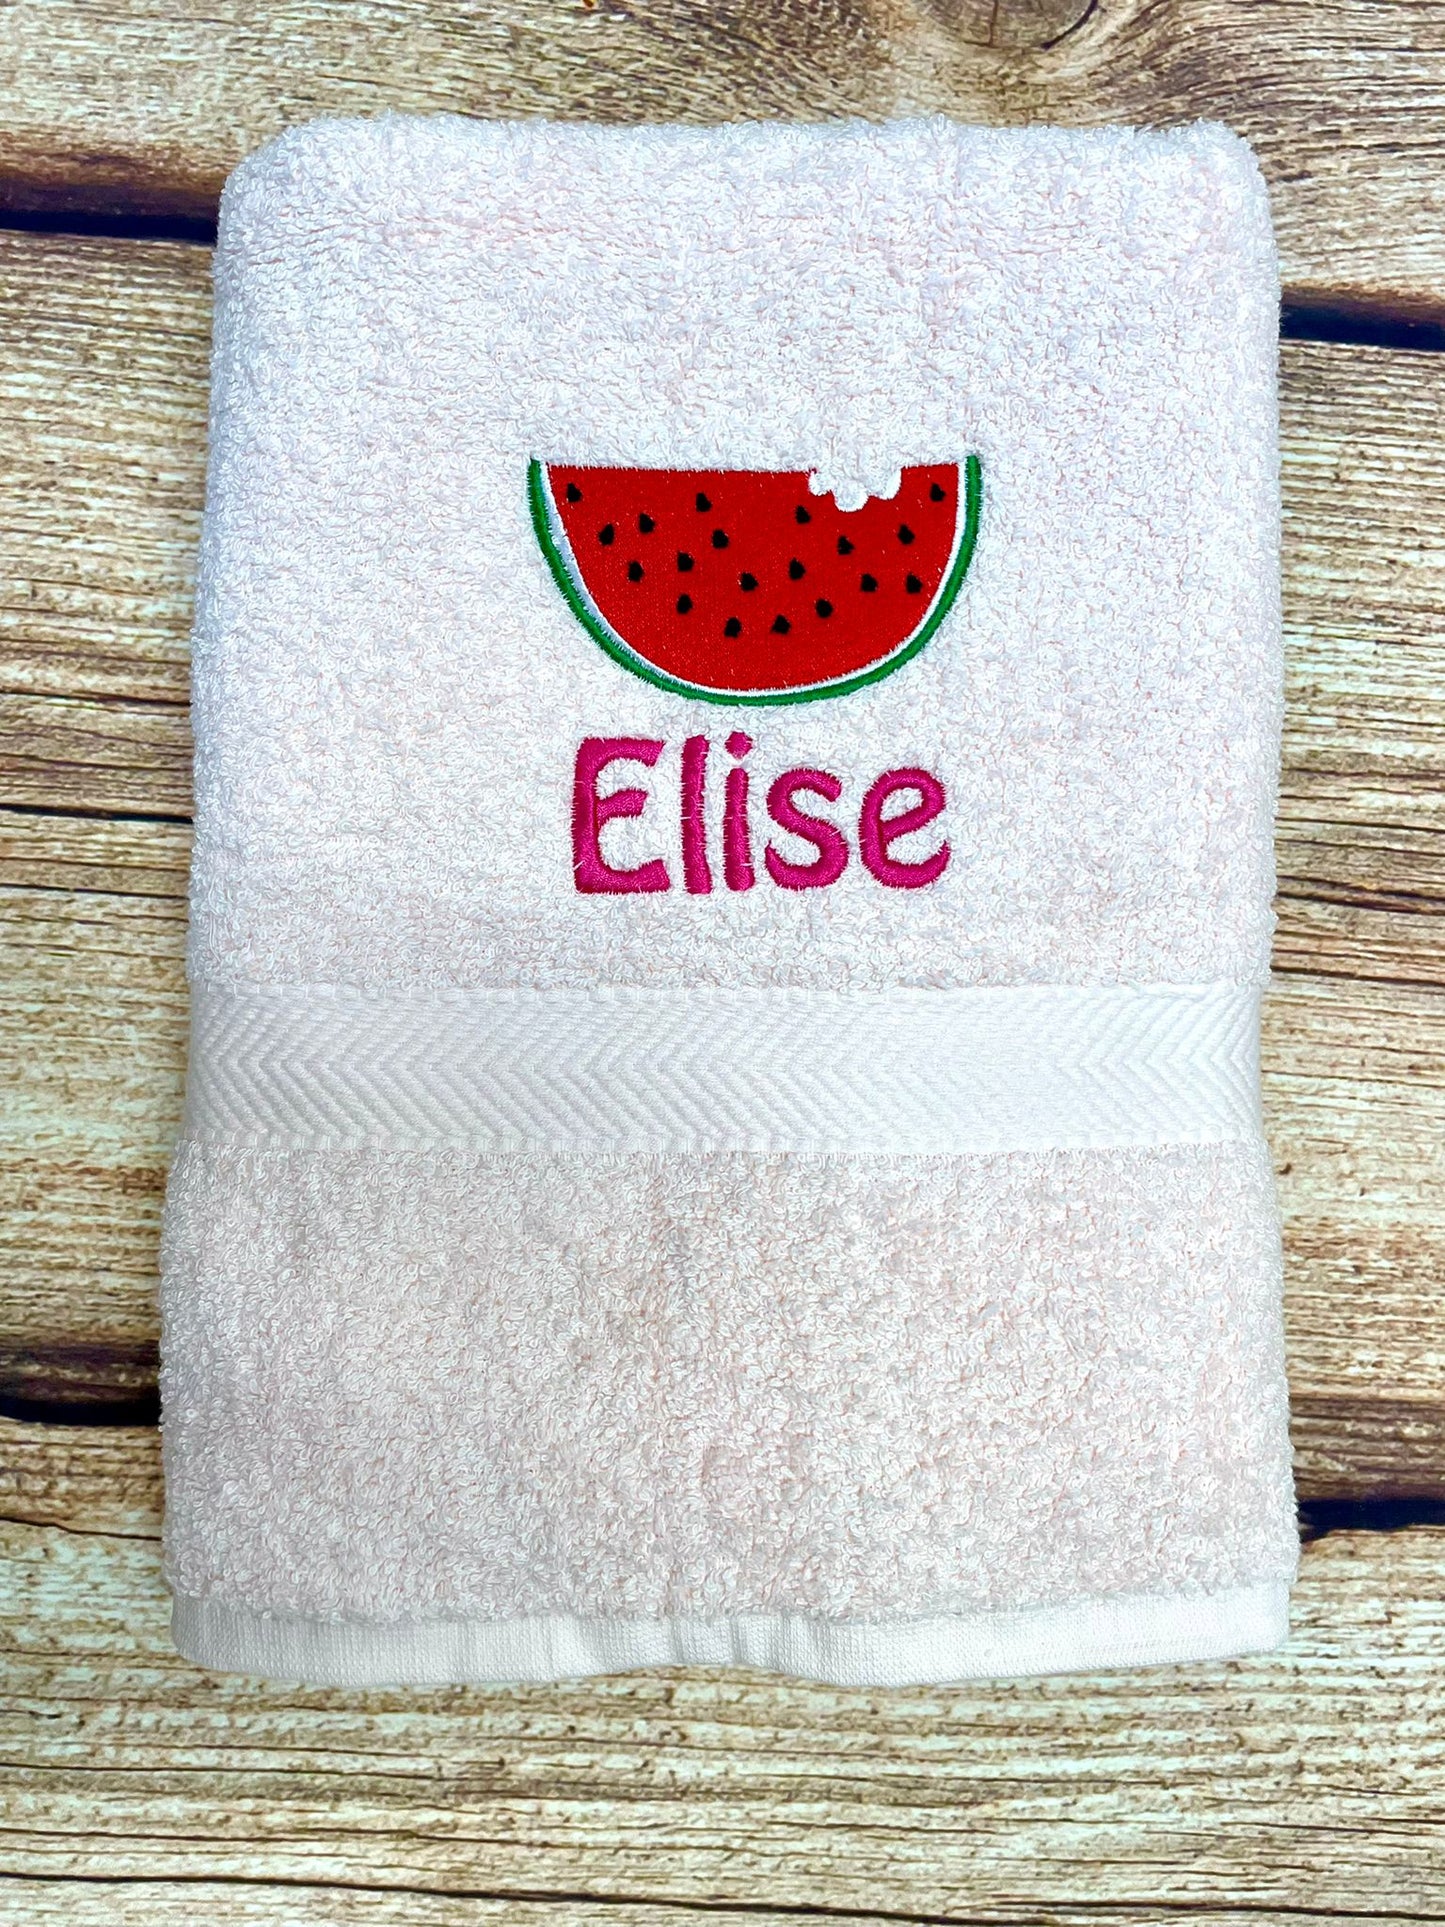 Personalised embroidered swimming or sports towel. Ideal gift // watermelon